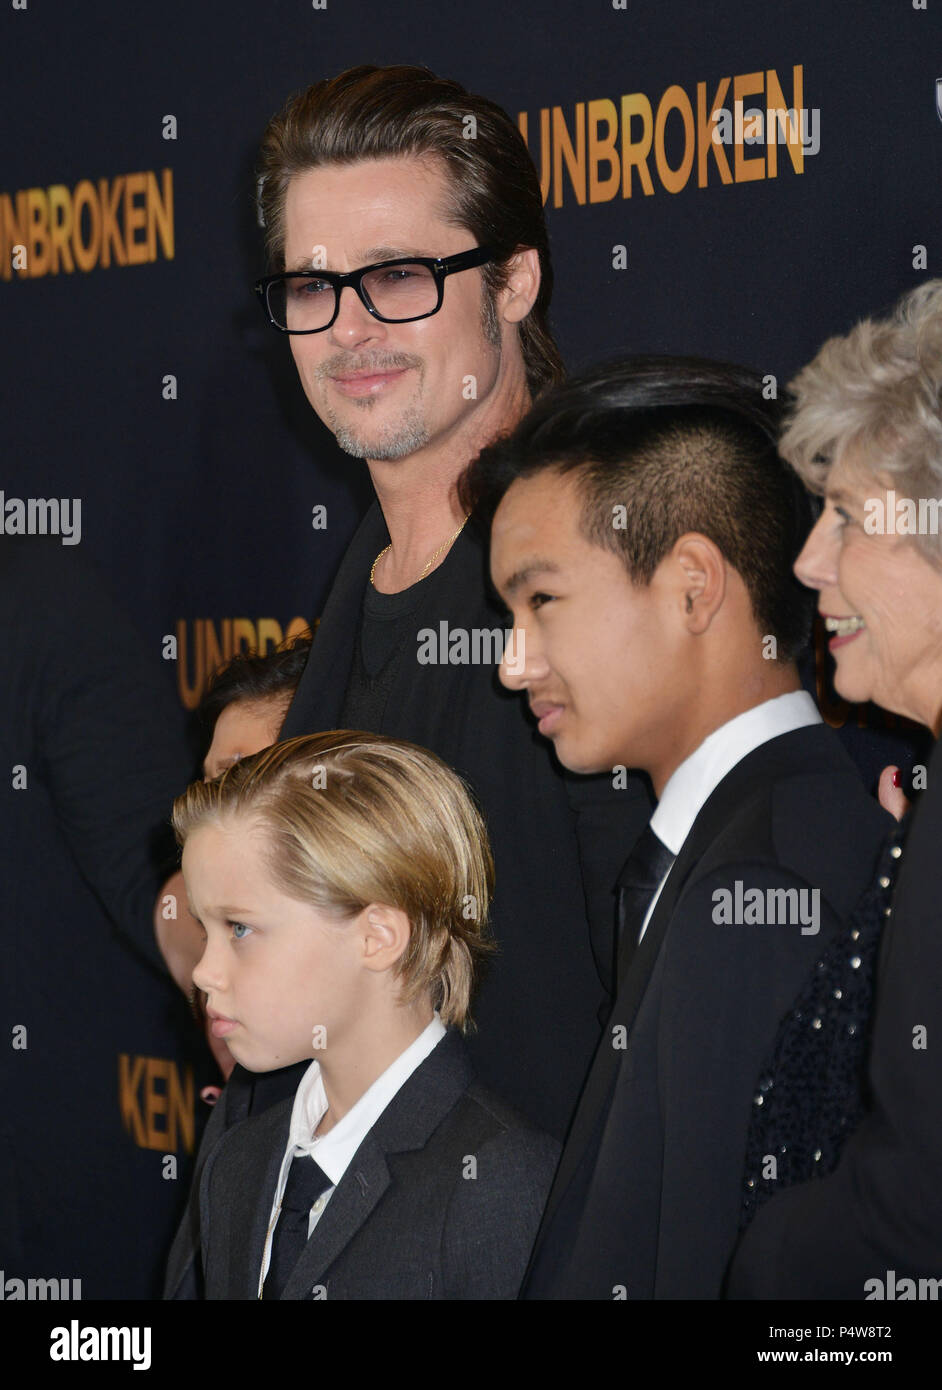 Brad Pitt, (L-R) Pax Thien Jolie-Pitt, Shiloh Nouvel Jolie-Pitt,, Maddox Jolie-Pitt, Jane Pitt, and William Pitt 049  at the Unbroken Premiere at the Dolby Theatre in Los Angeles. Dec. 14, 2014Brad Pitt, (L-R) Pax Thien Jolie-Pitt, Shiloh Nouvel Jolie-Pitt,, Maddox Jolie-Pitt, Jane Pitt, and William Pitt 049 ------------- Red Carpet Event, Vertical, USA, Film Industry, Celebrities,  Photography, Bestof, Arts Culture and Entertainment, Topix Celebrities fashion /  Vertical, Best of, Event in Hollywood Life - California,  Red Carpet and backstage, USA, Film Industry, Celebrities,  movie celebrit Stock Photo